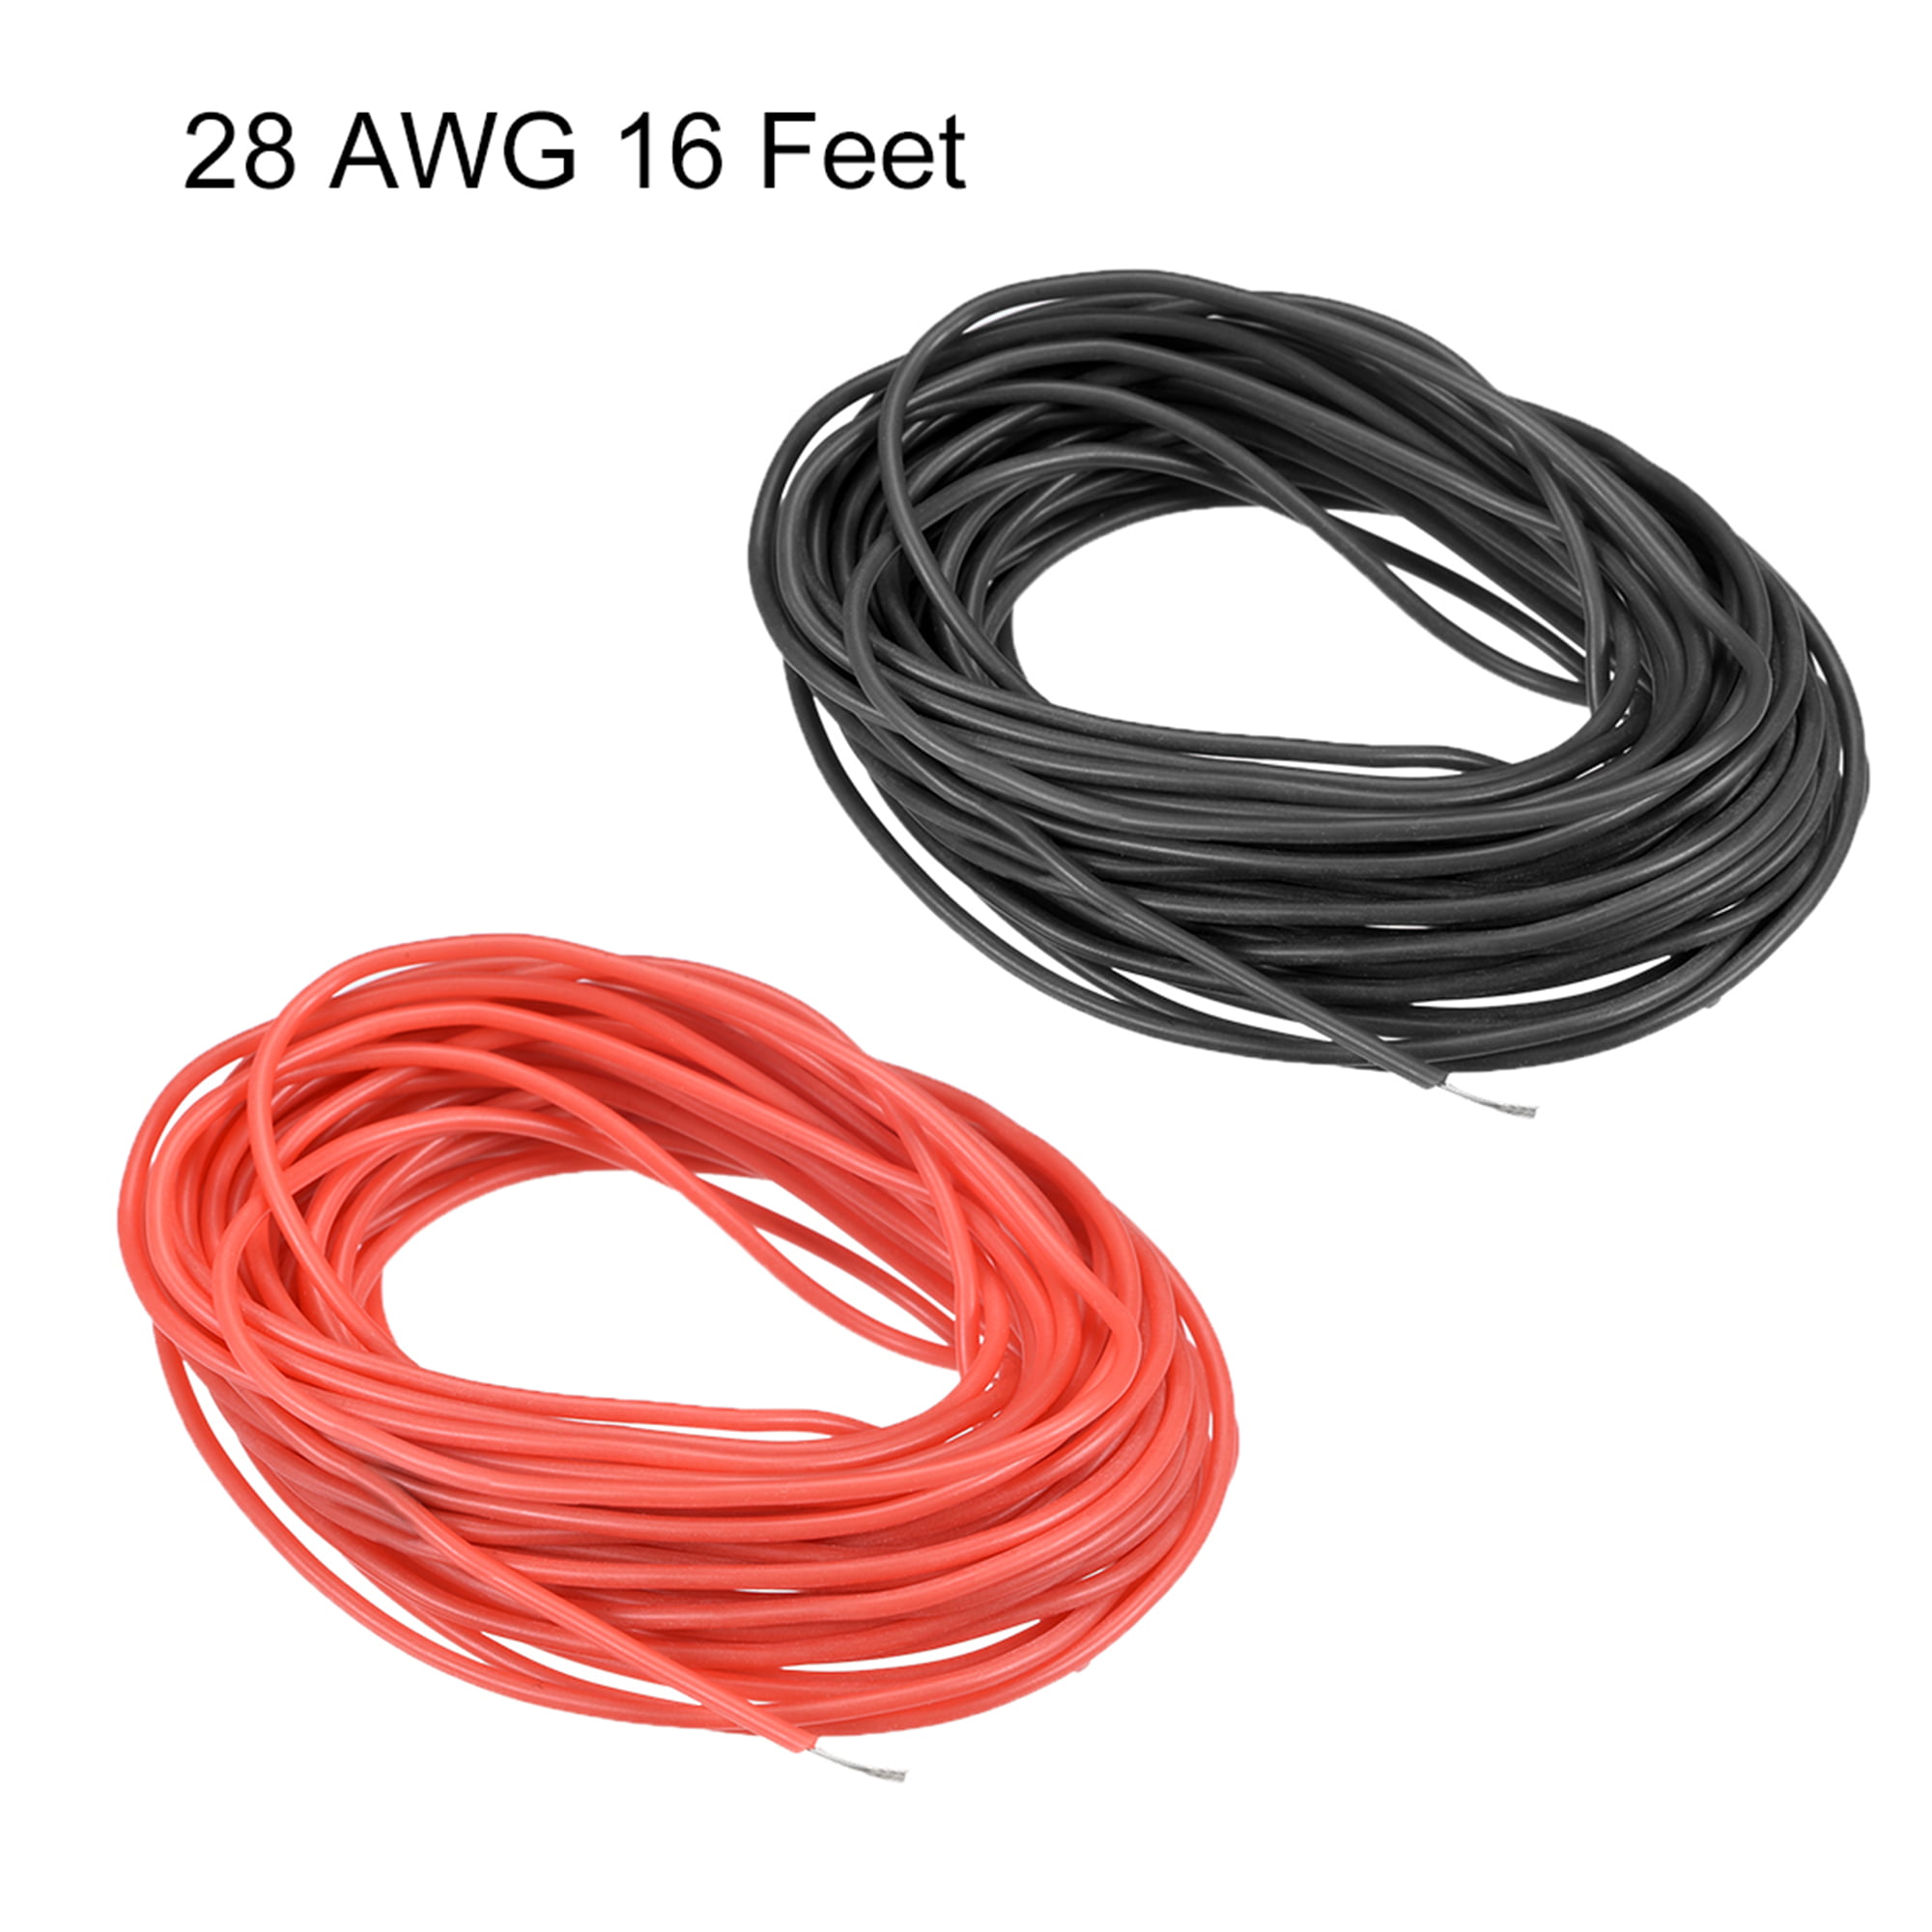 Details about   28 Gauge Flexible Silicone Wire Red 100 feet 600V 200 deg C Tinned Copper Wire 